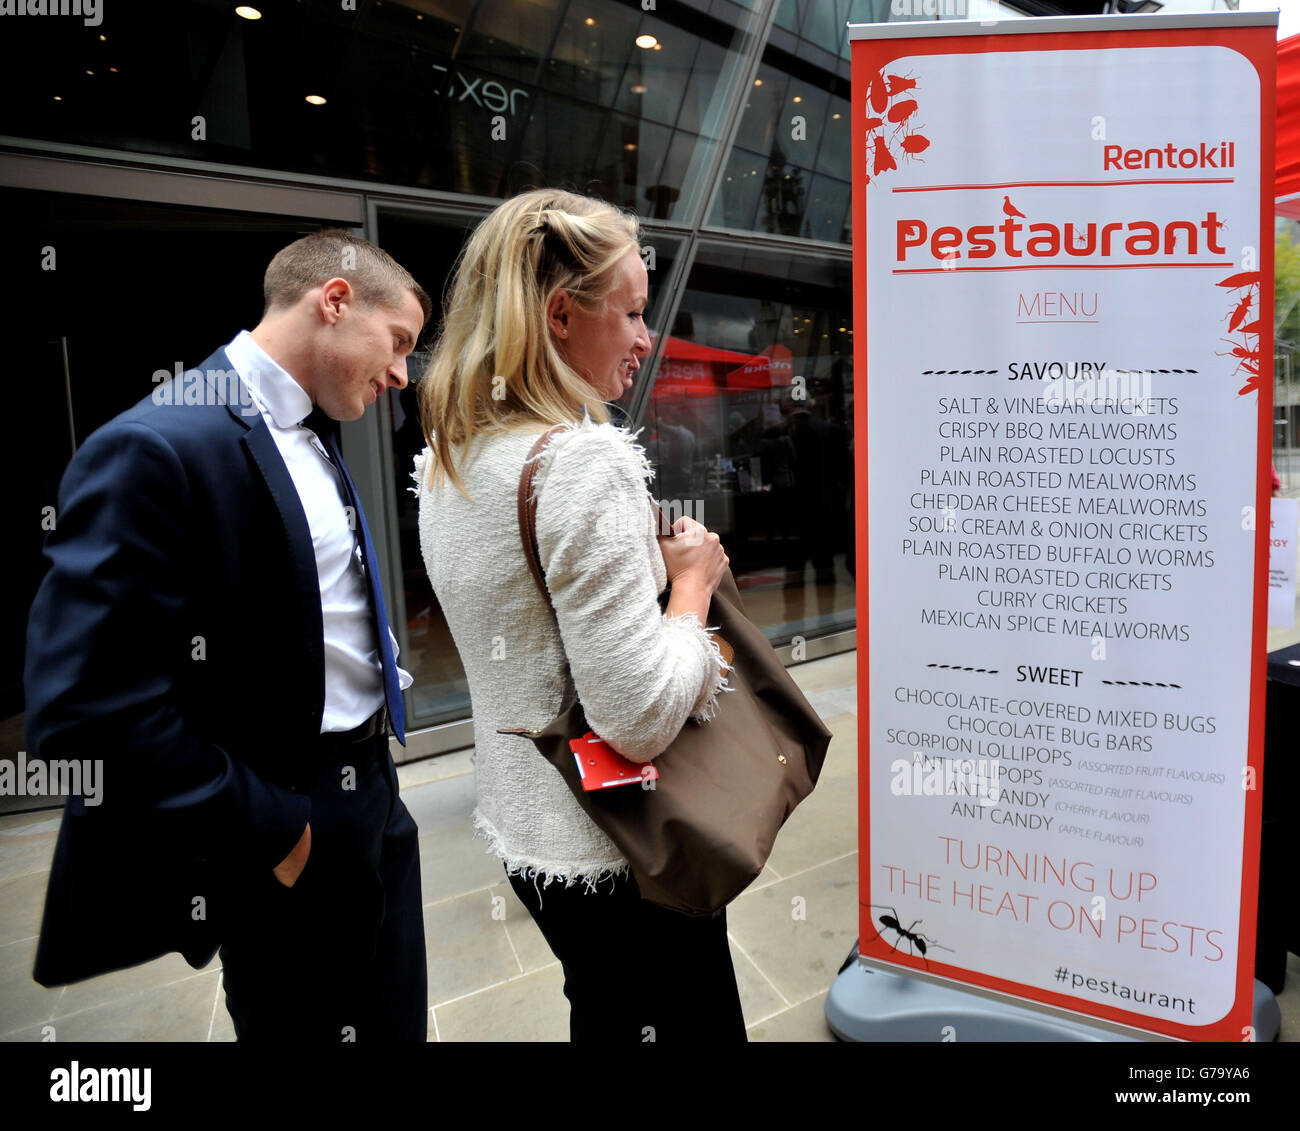 Members of the public look at Rentokil's Pop-up Pestaurant menu at One New Change, central London. Stock Photo